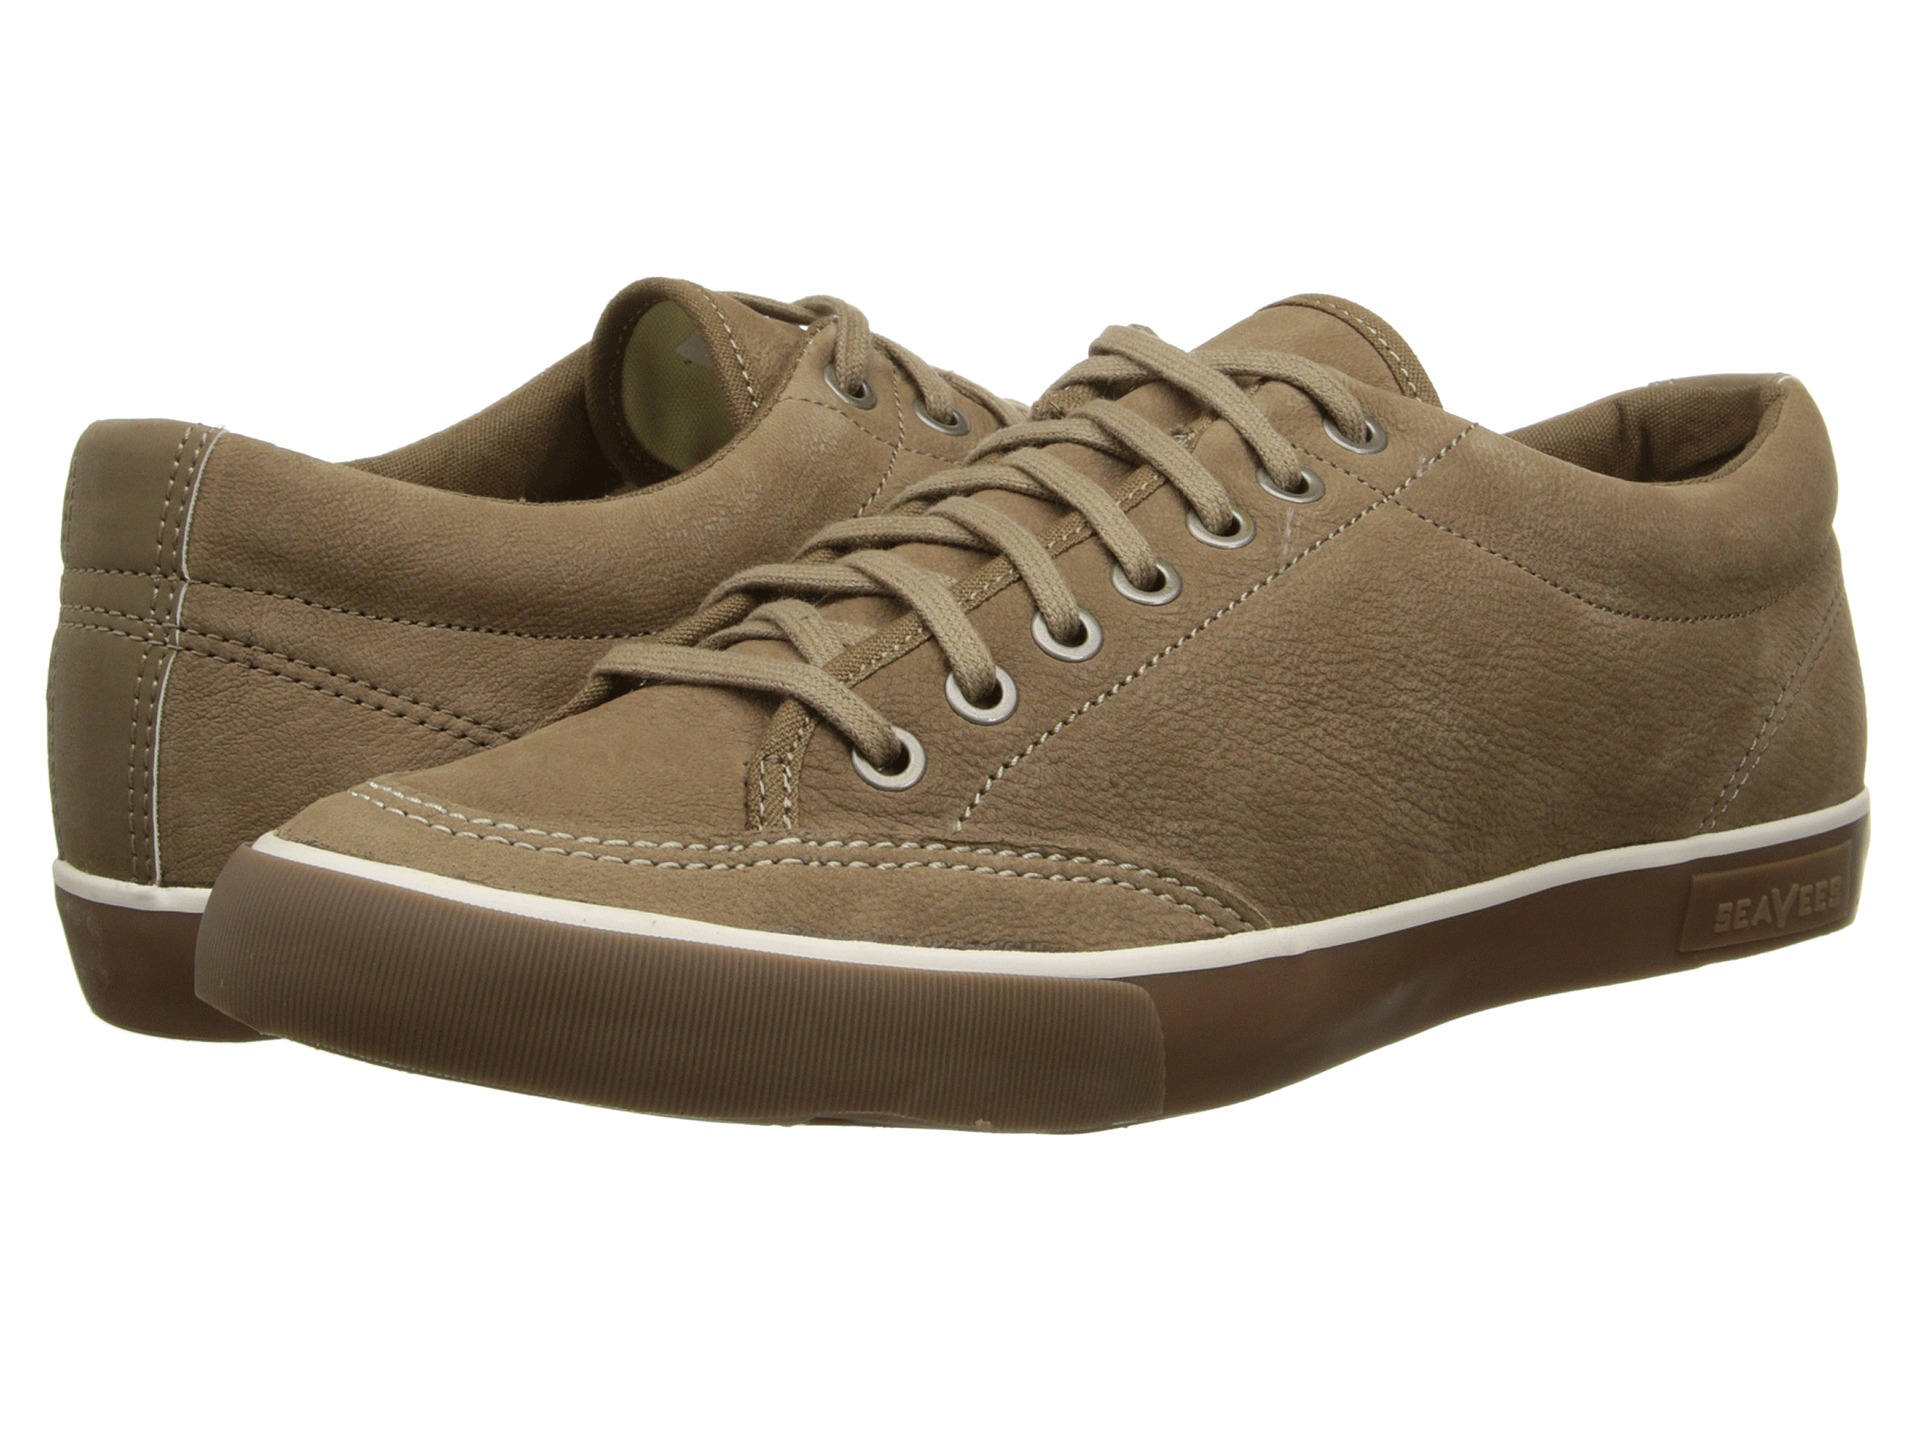 ... 05 65 Westwood Tennis Shoe Roadster, Shoes | Shipped Free at Zappos